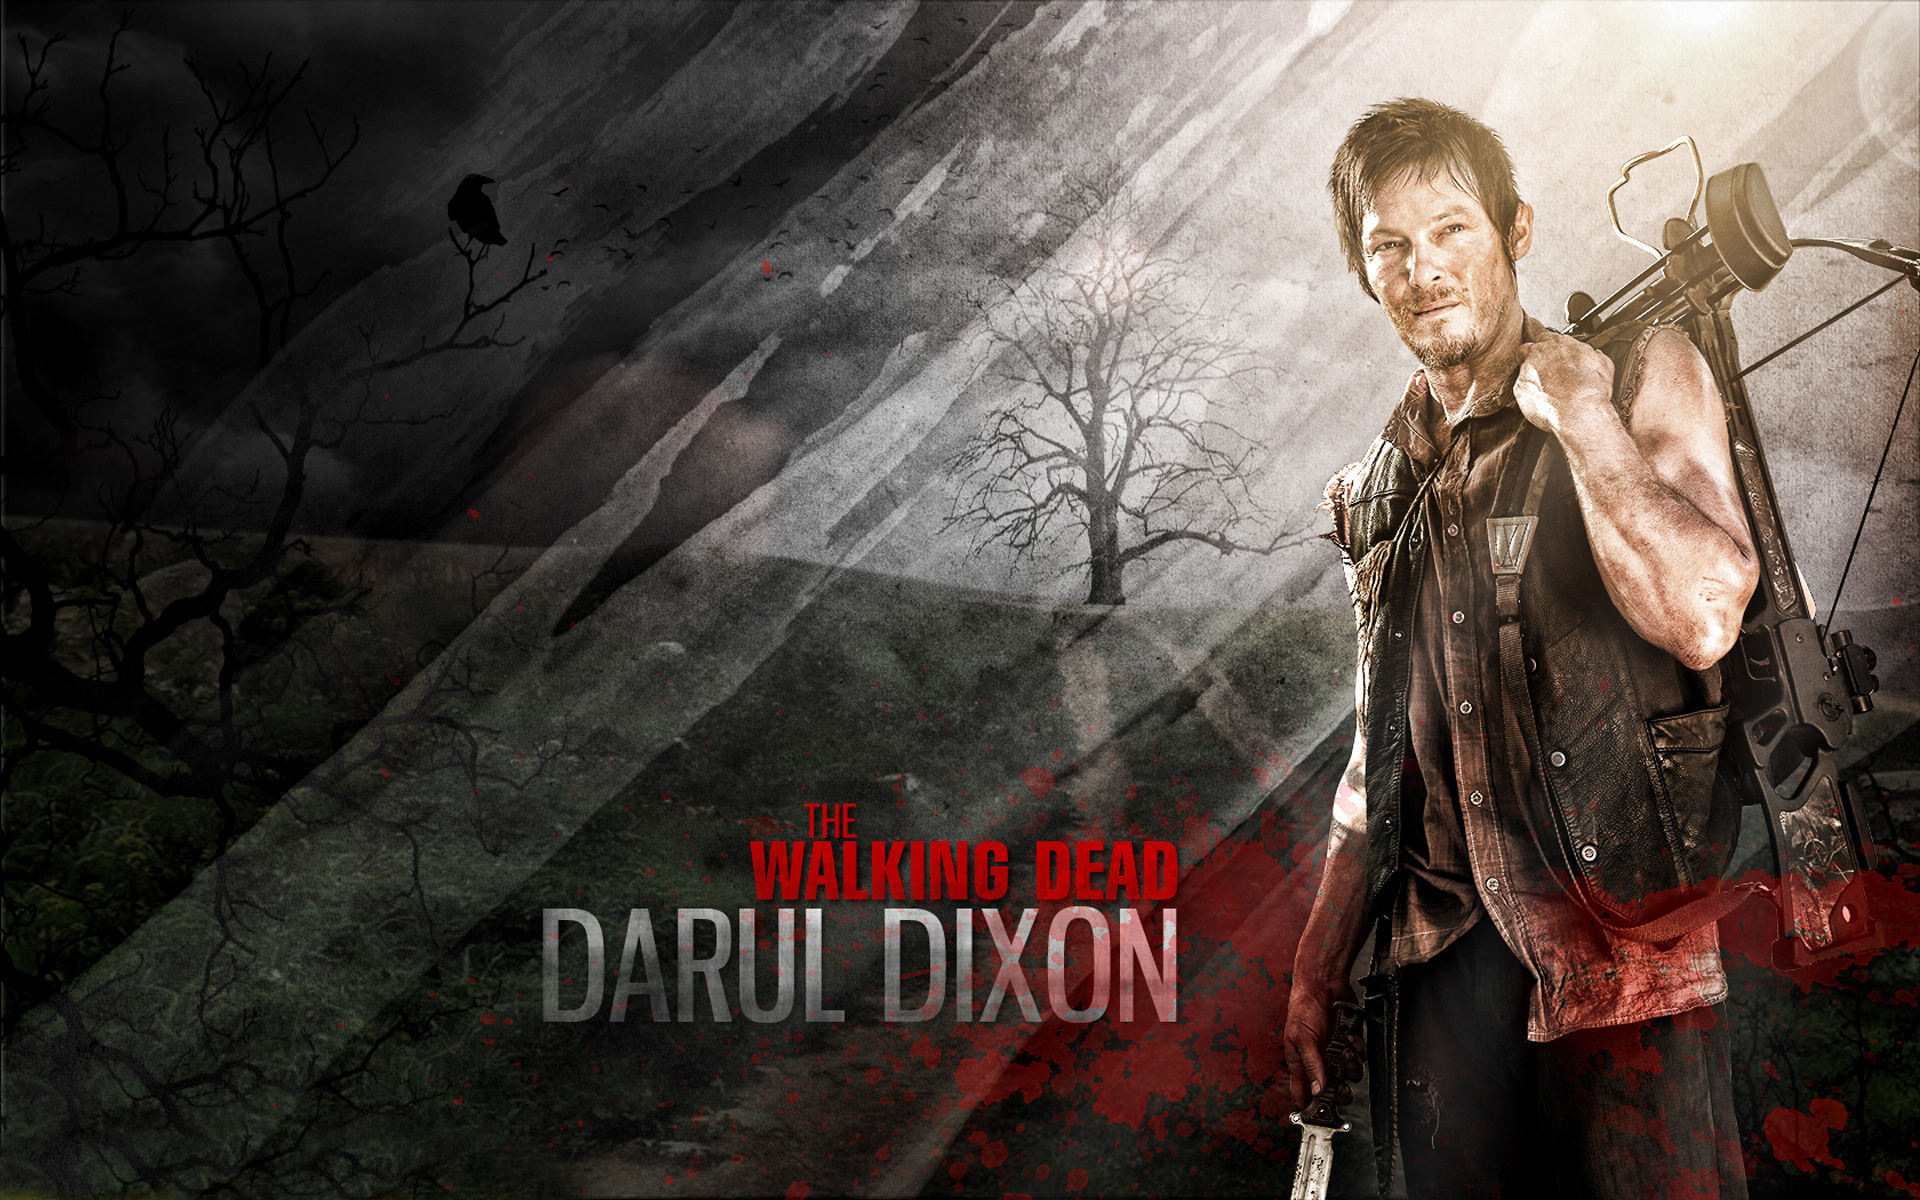 the walking dead wallpapers55com   Best Wallpapers for PCs Laptops 1920x1200